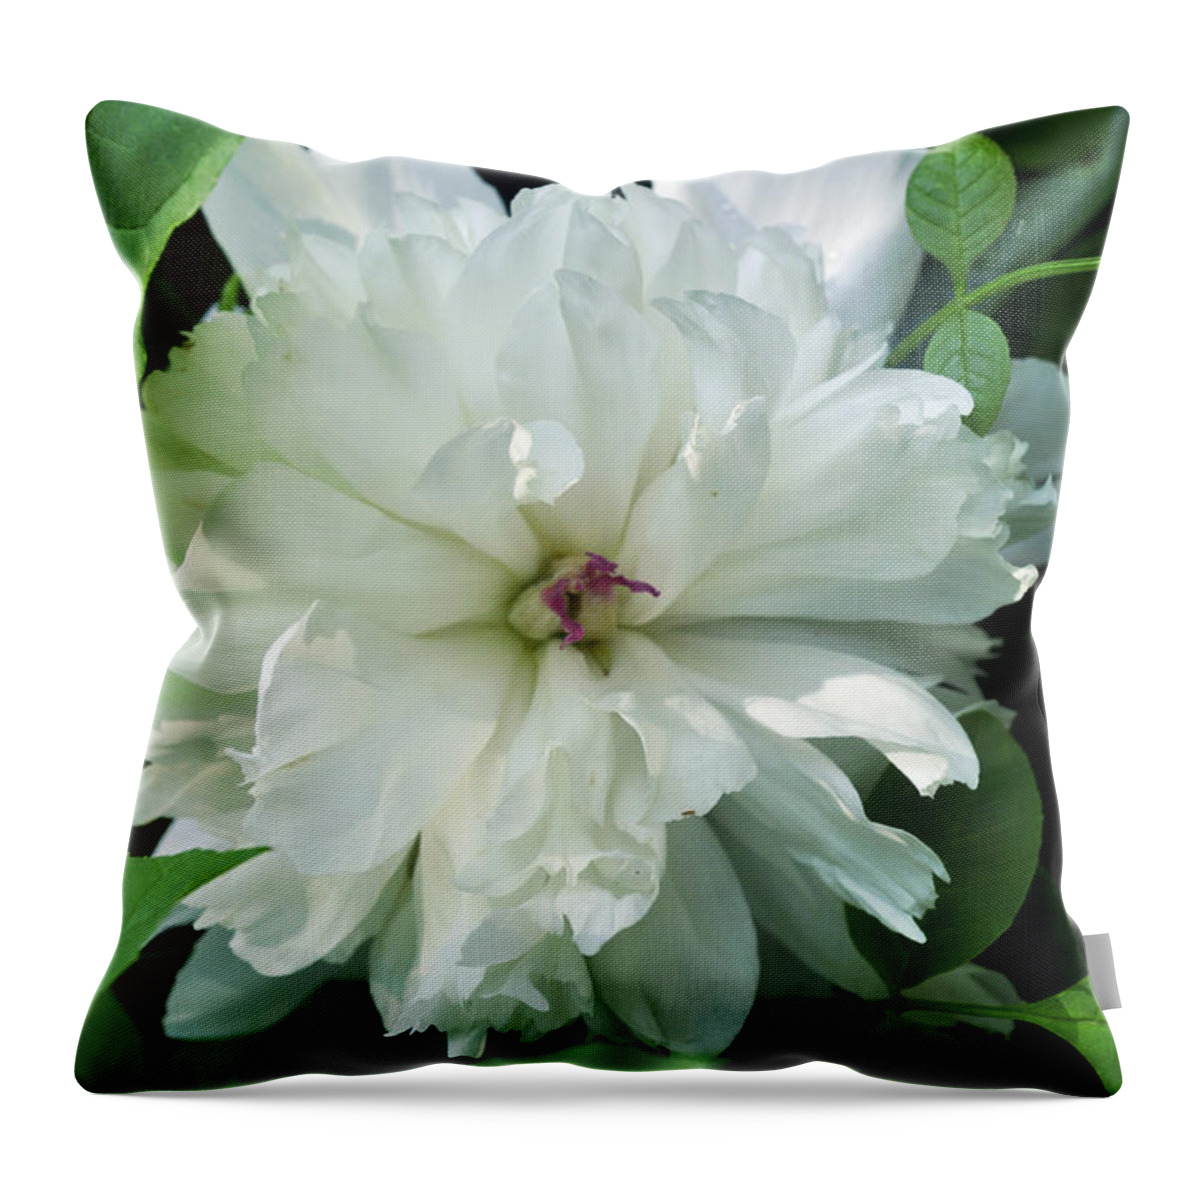 Peonese Throw Pillow featuring the photograph White Peonese by Verana Stark